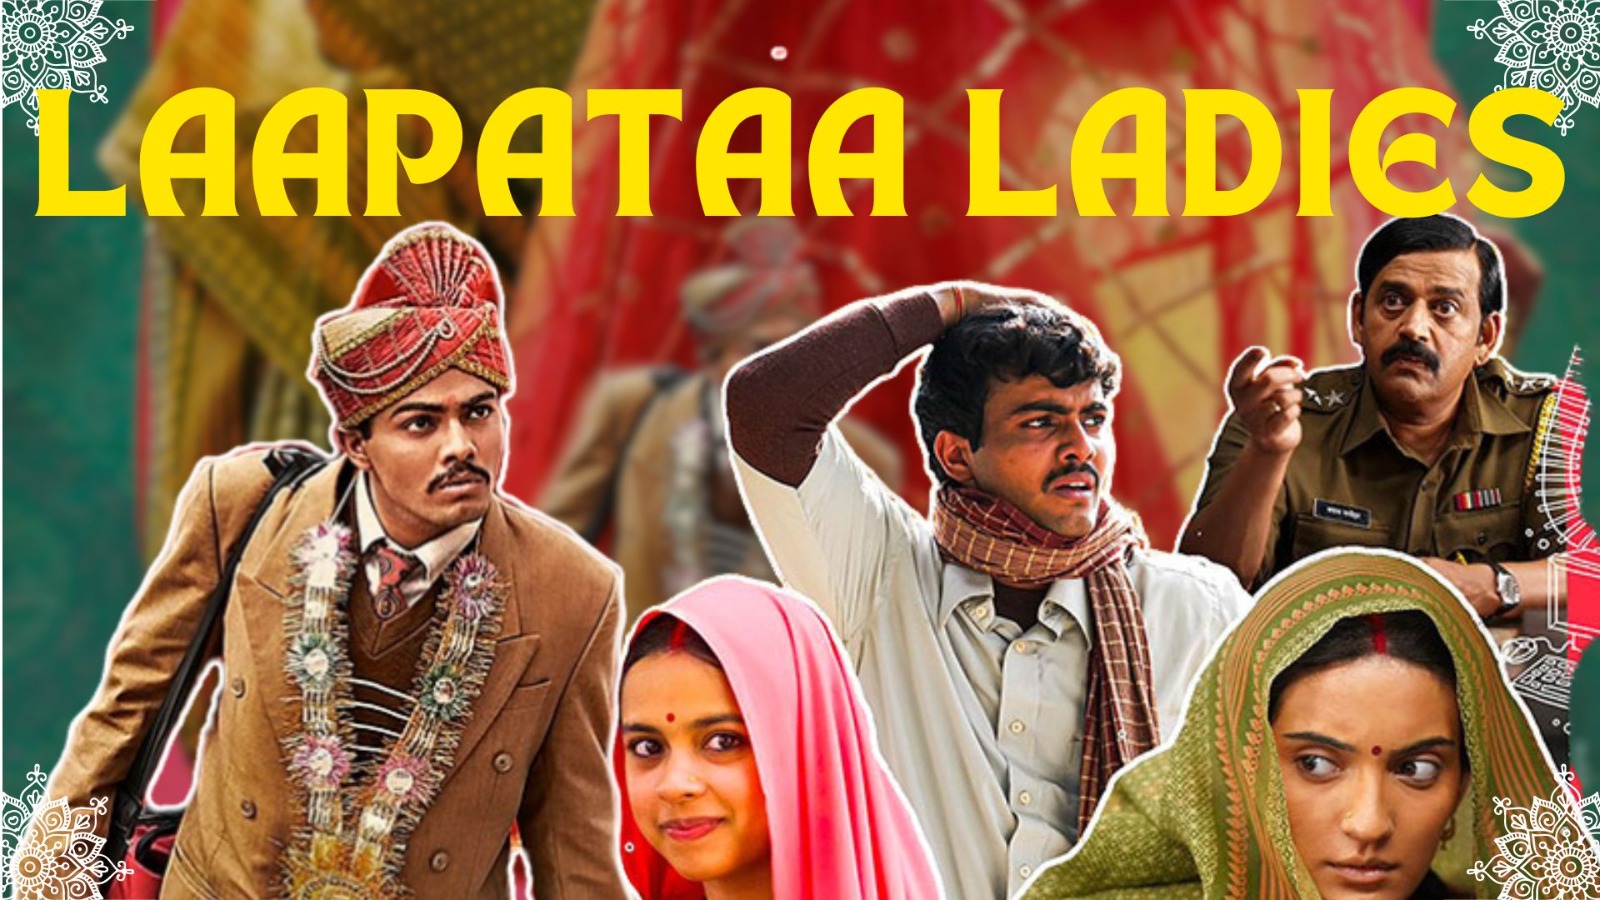 ‘Laapataa Ladies’ Review: Sincere Performances, Earnest Screenplay Power Compelling Comedy Drama